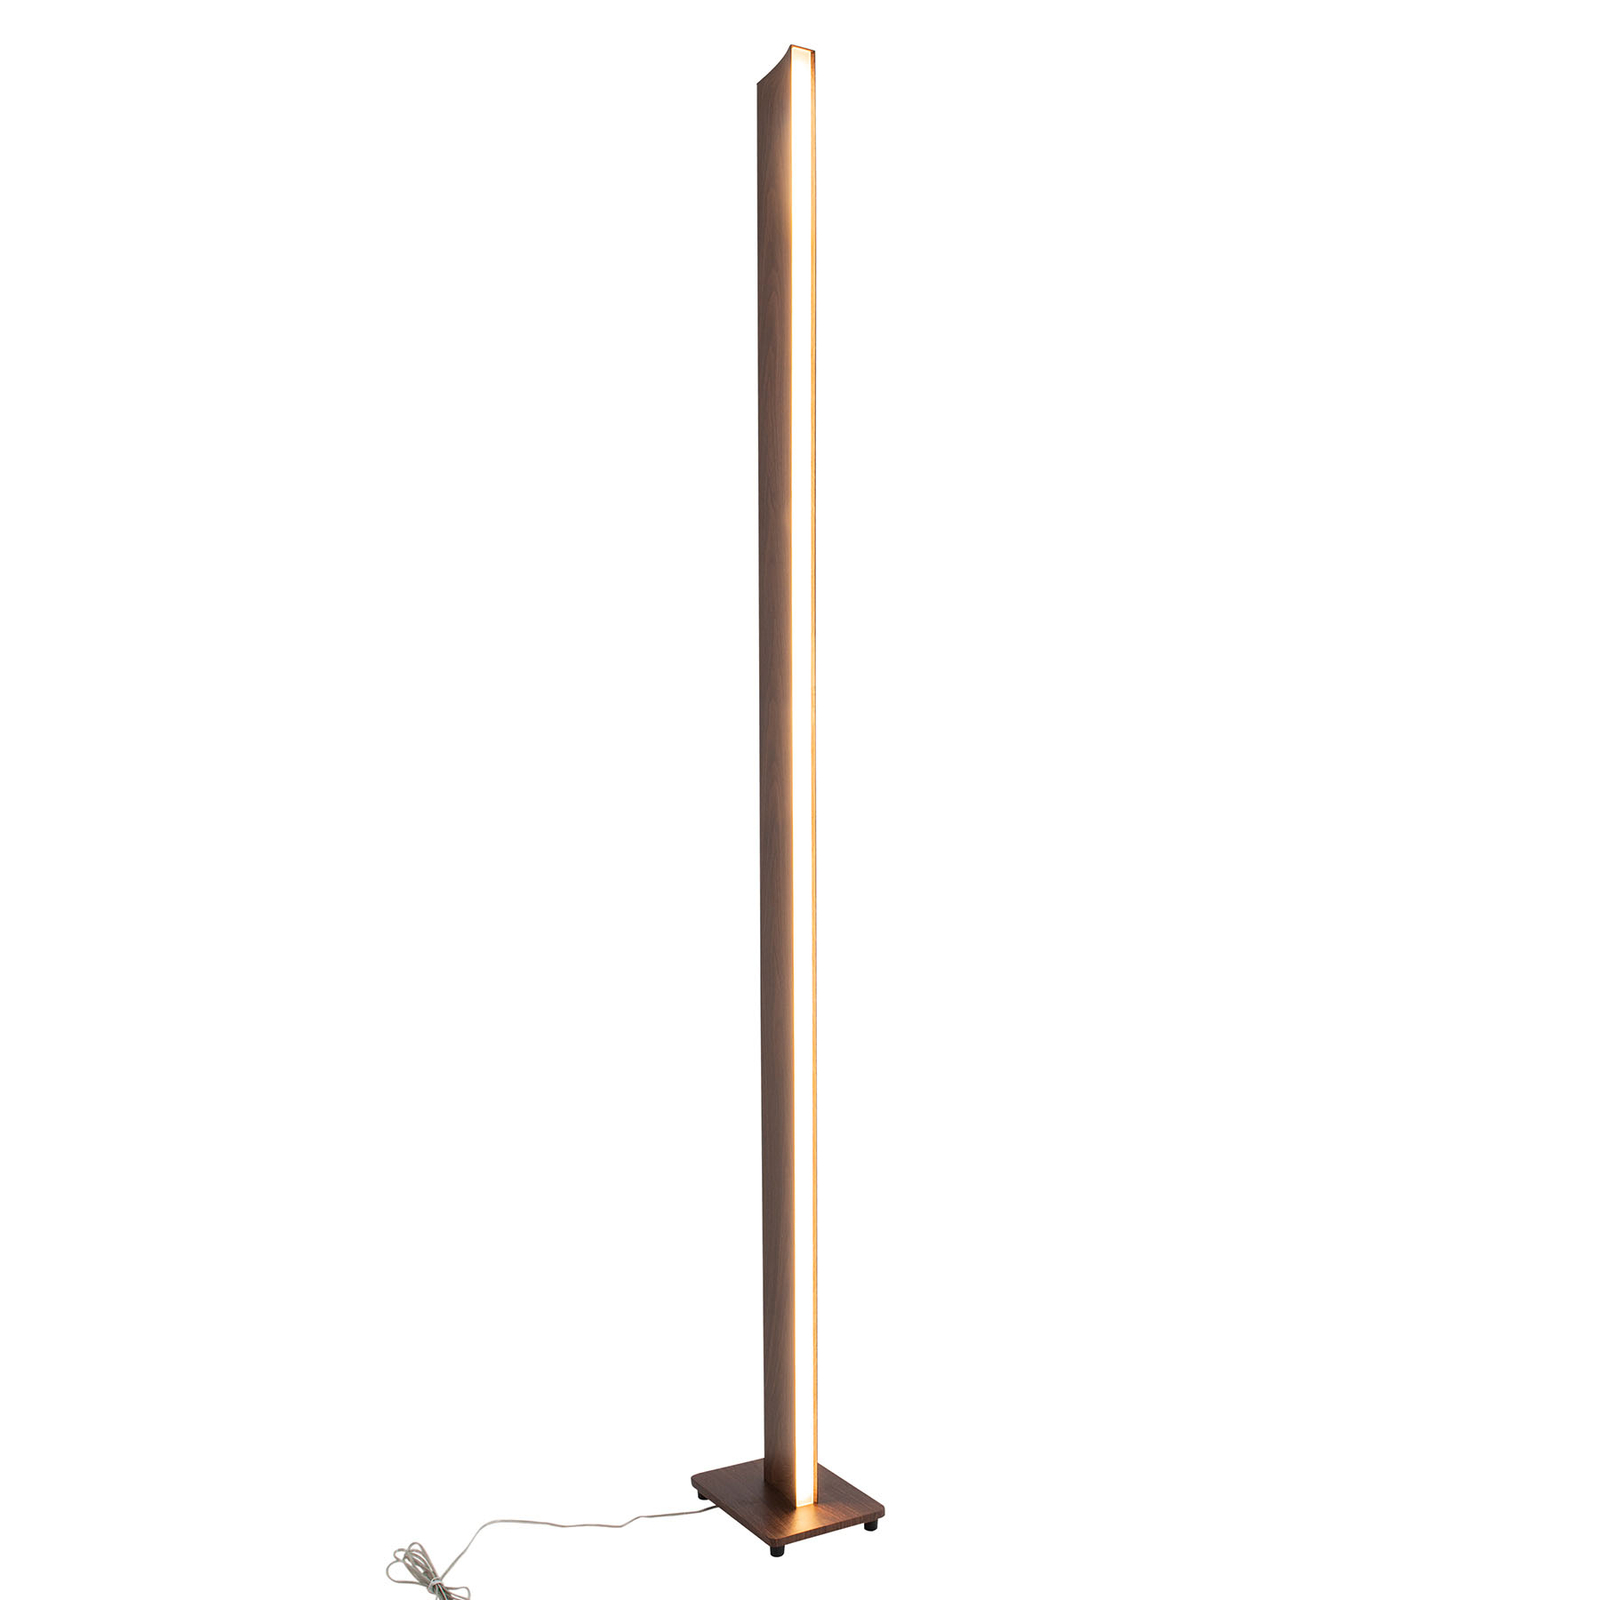 Madera LED floor lamp, wooden look, dimmable